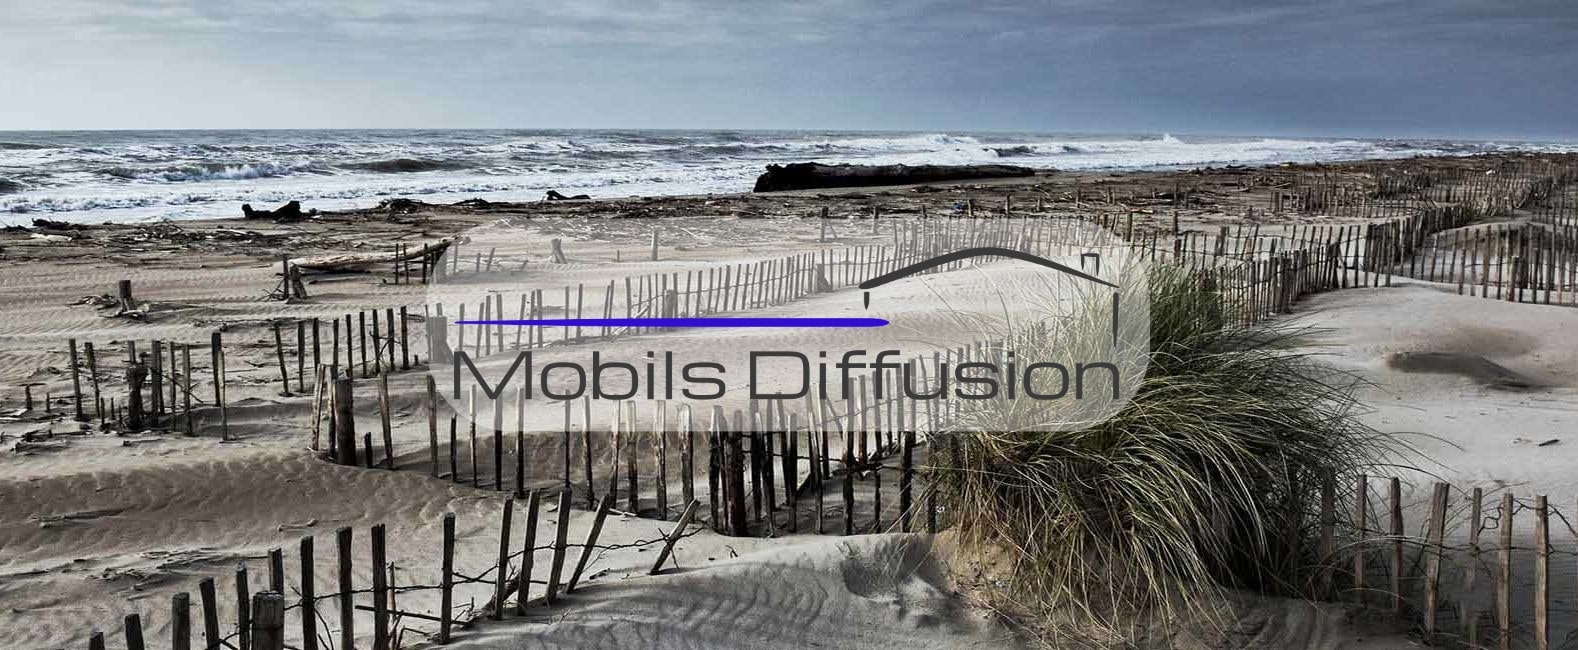 Mobils Diffusion - Camping plot for mobile homes in the center of the Camargue